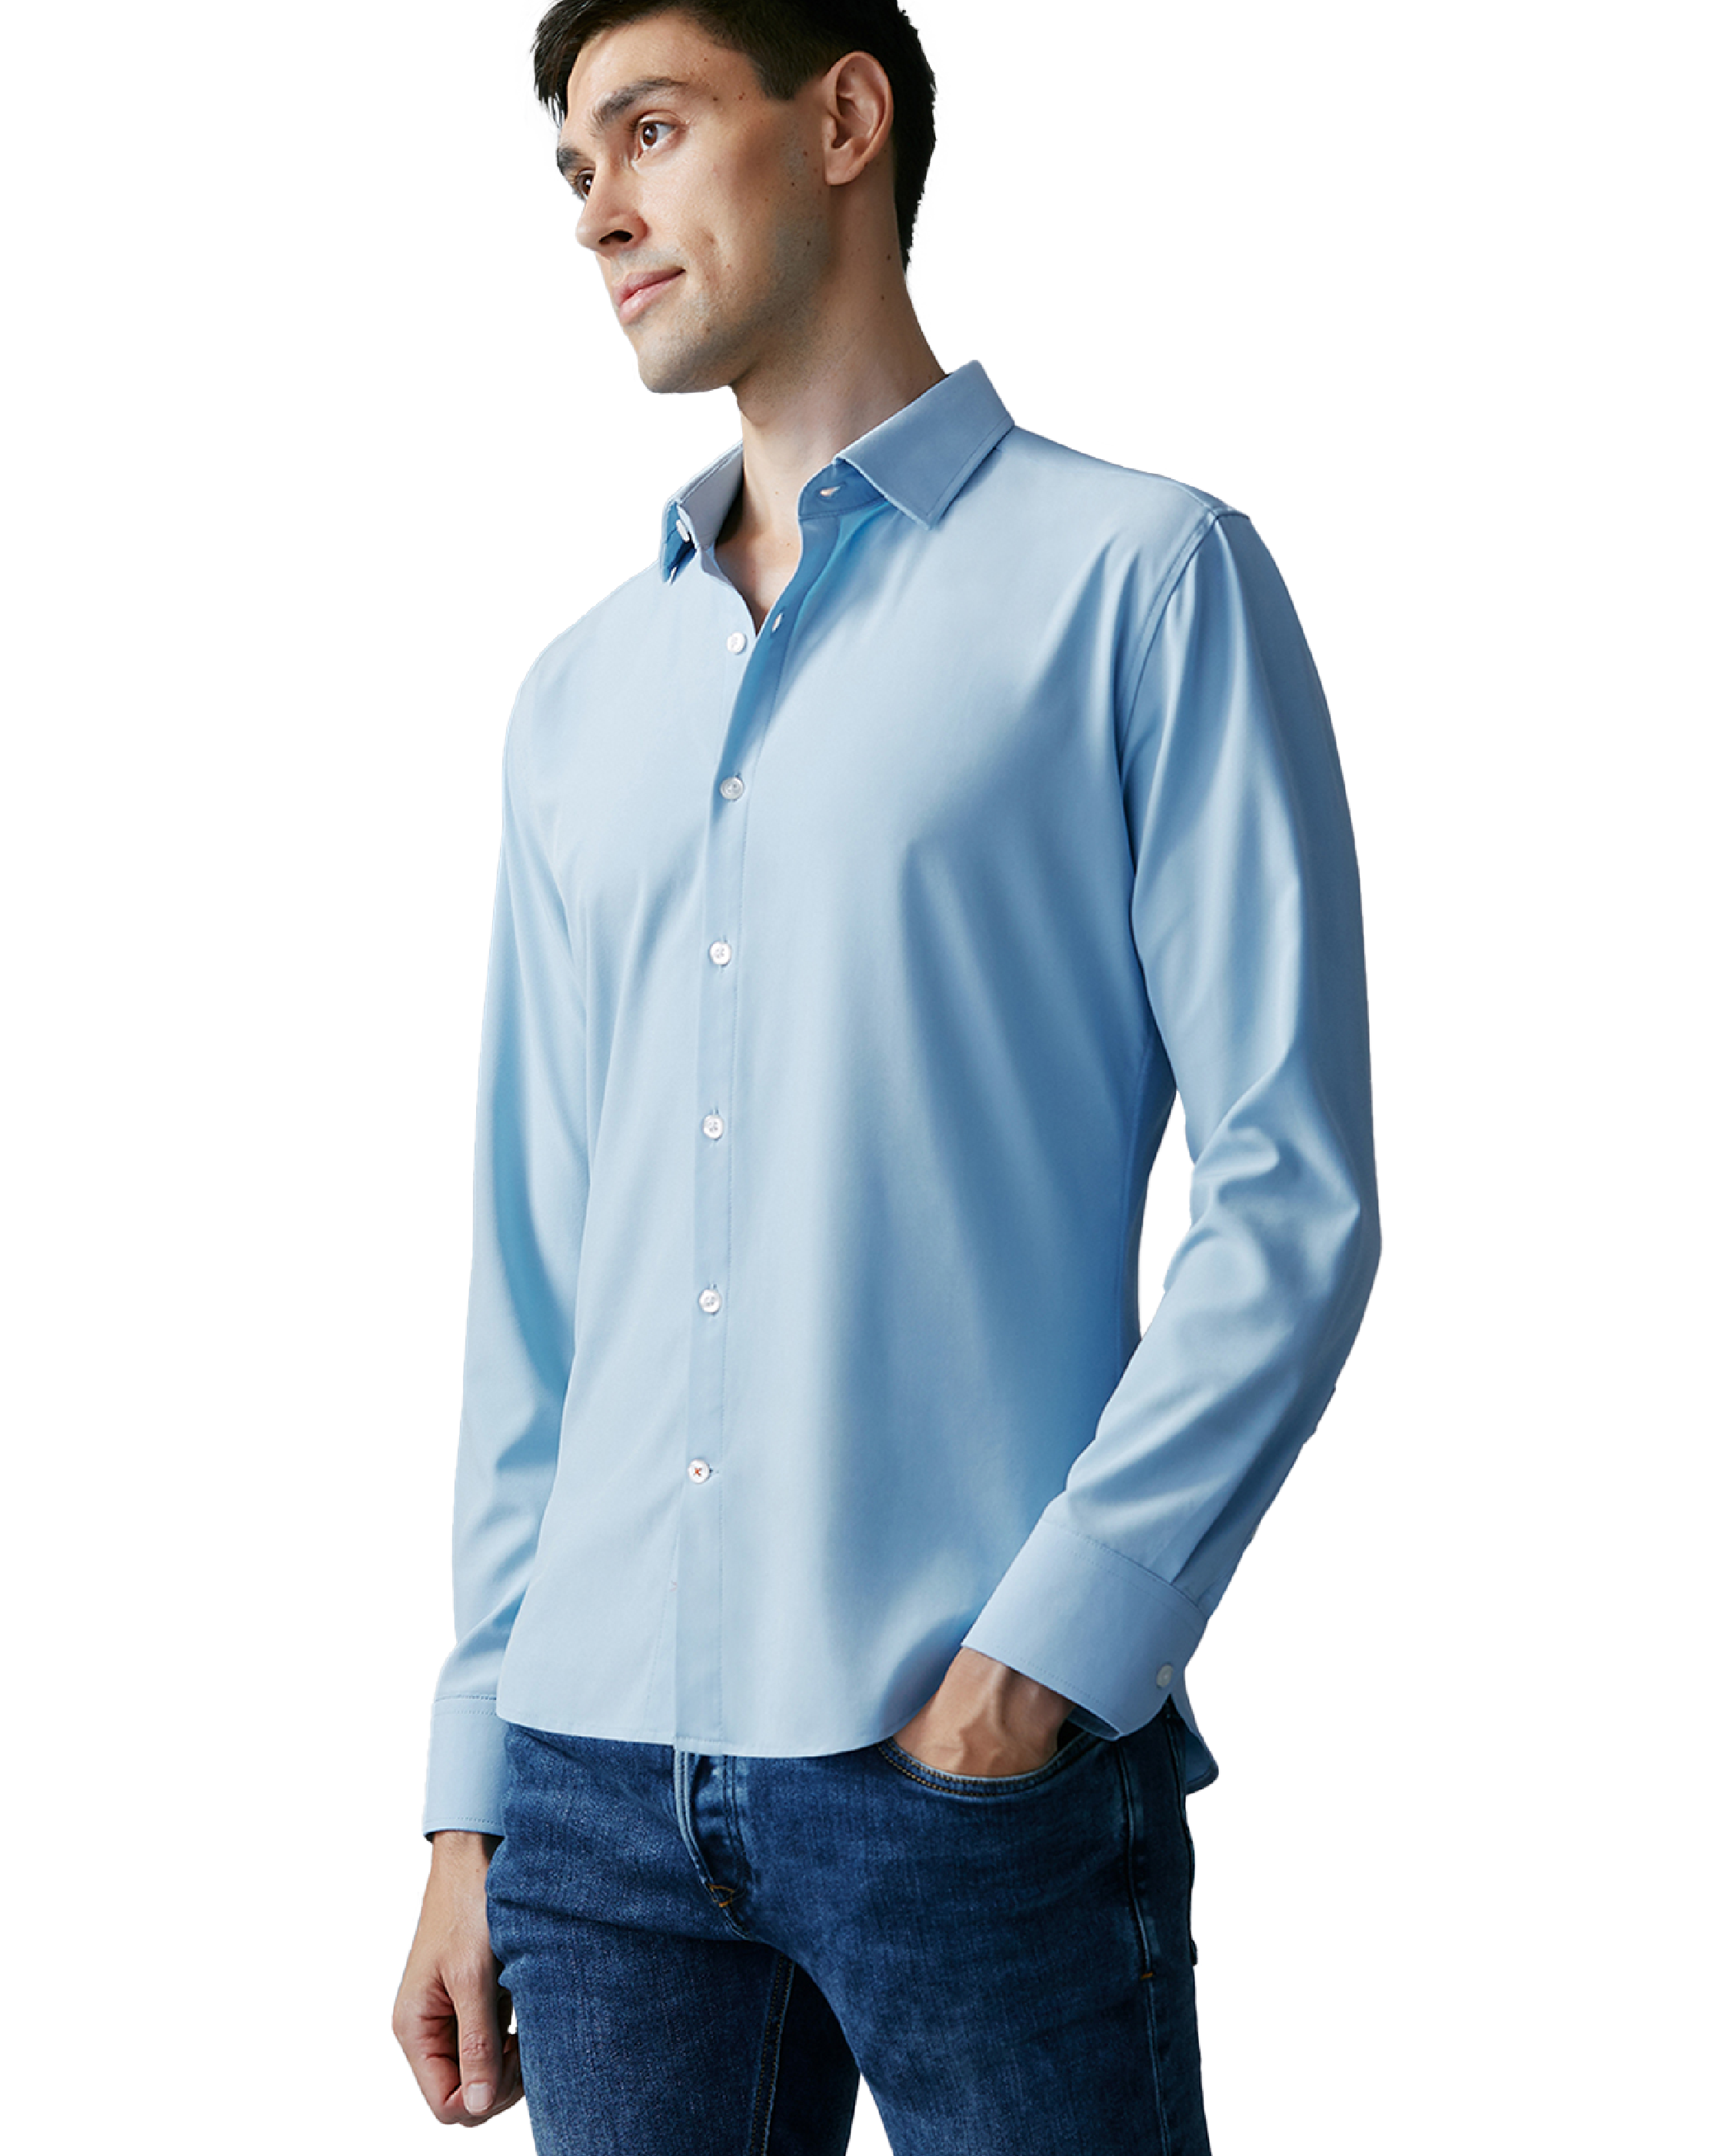 Performance Dress Shirts for Men – Moisture Wicking, Wrinkle Free – All ...